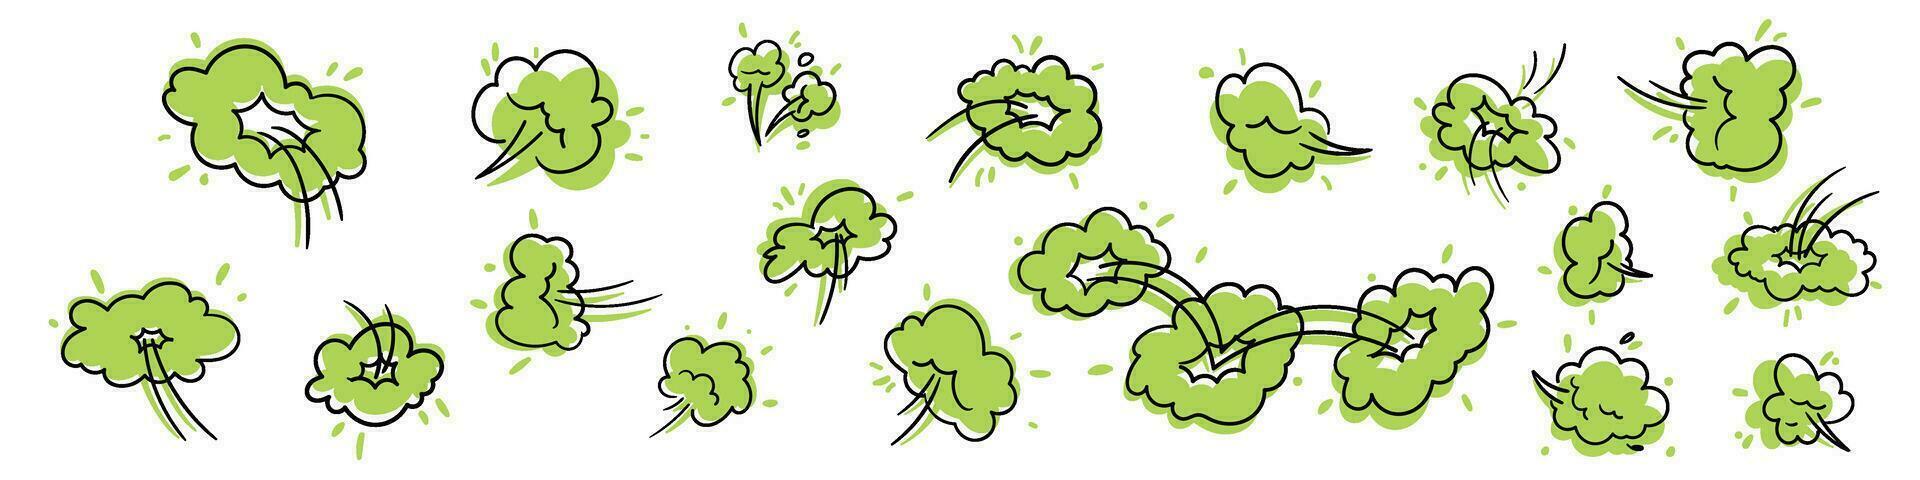 Cartoon icon of stinky green cloud bad odor, farts, or toxic gas. Smell or poison. Flat vector illustration isolated on white background.